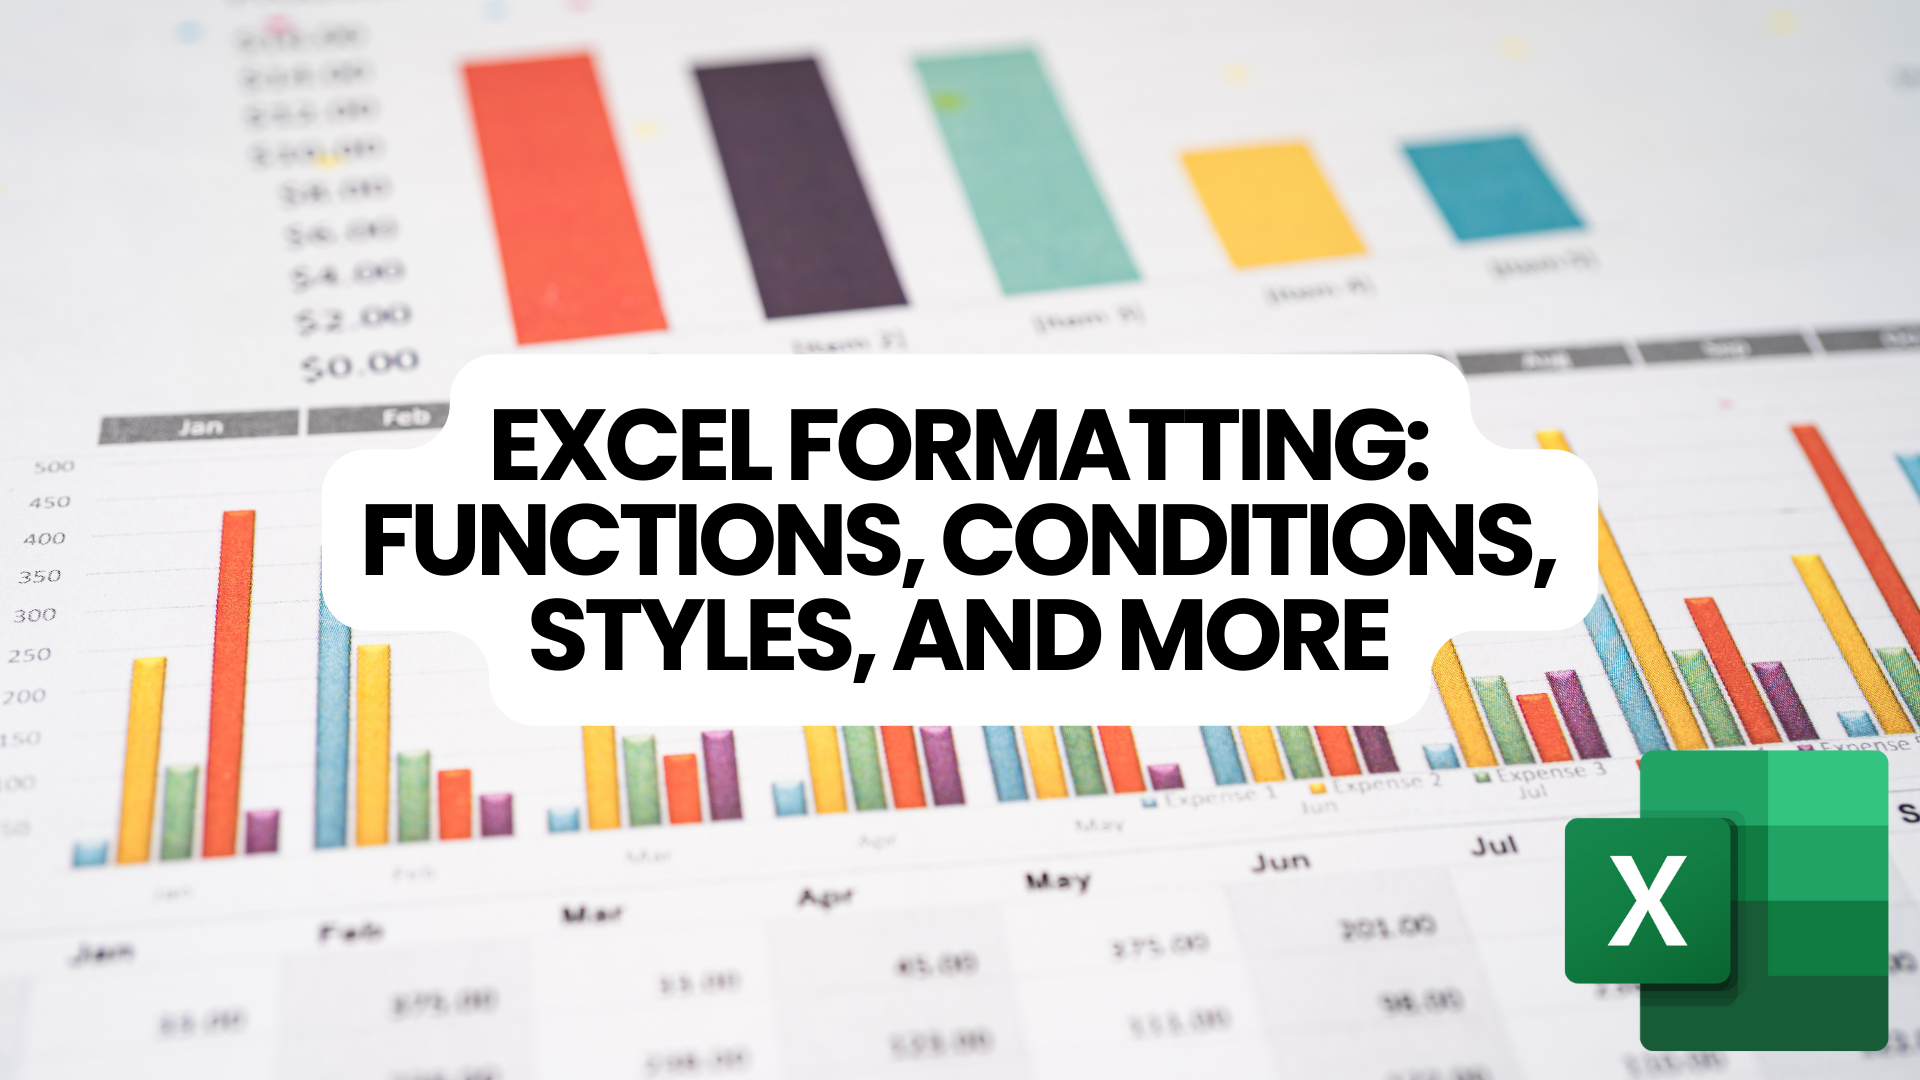 Excel Formatting Functions, Conditions, Styles, and More